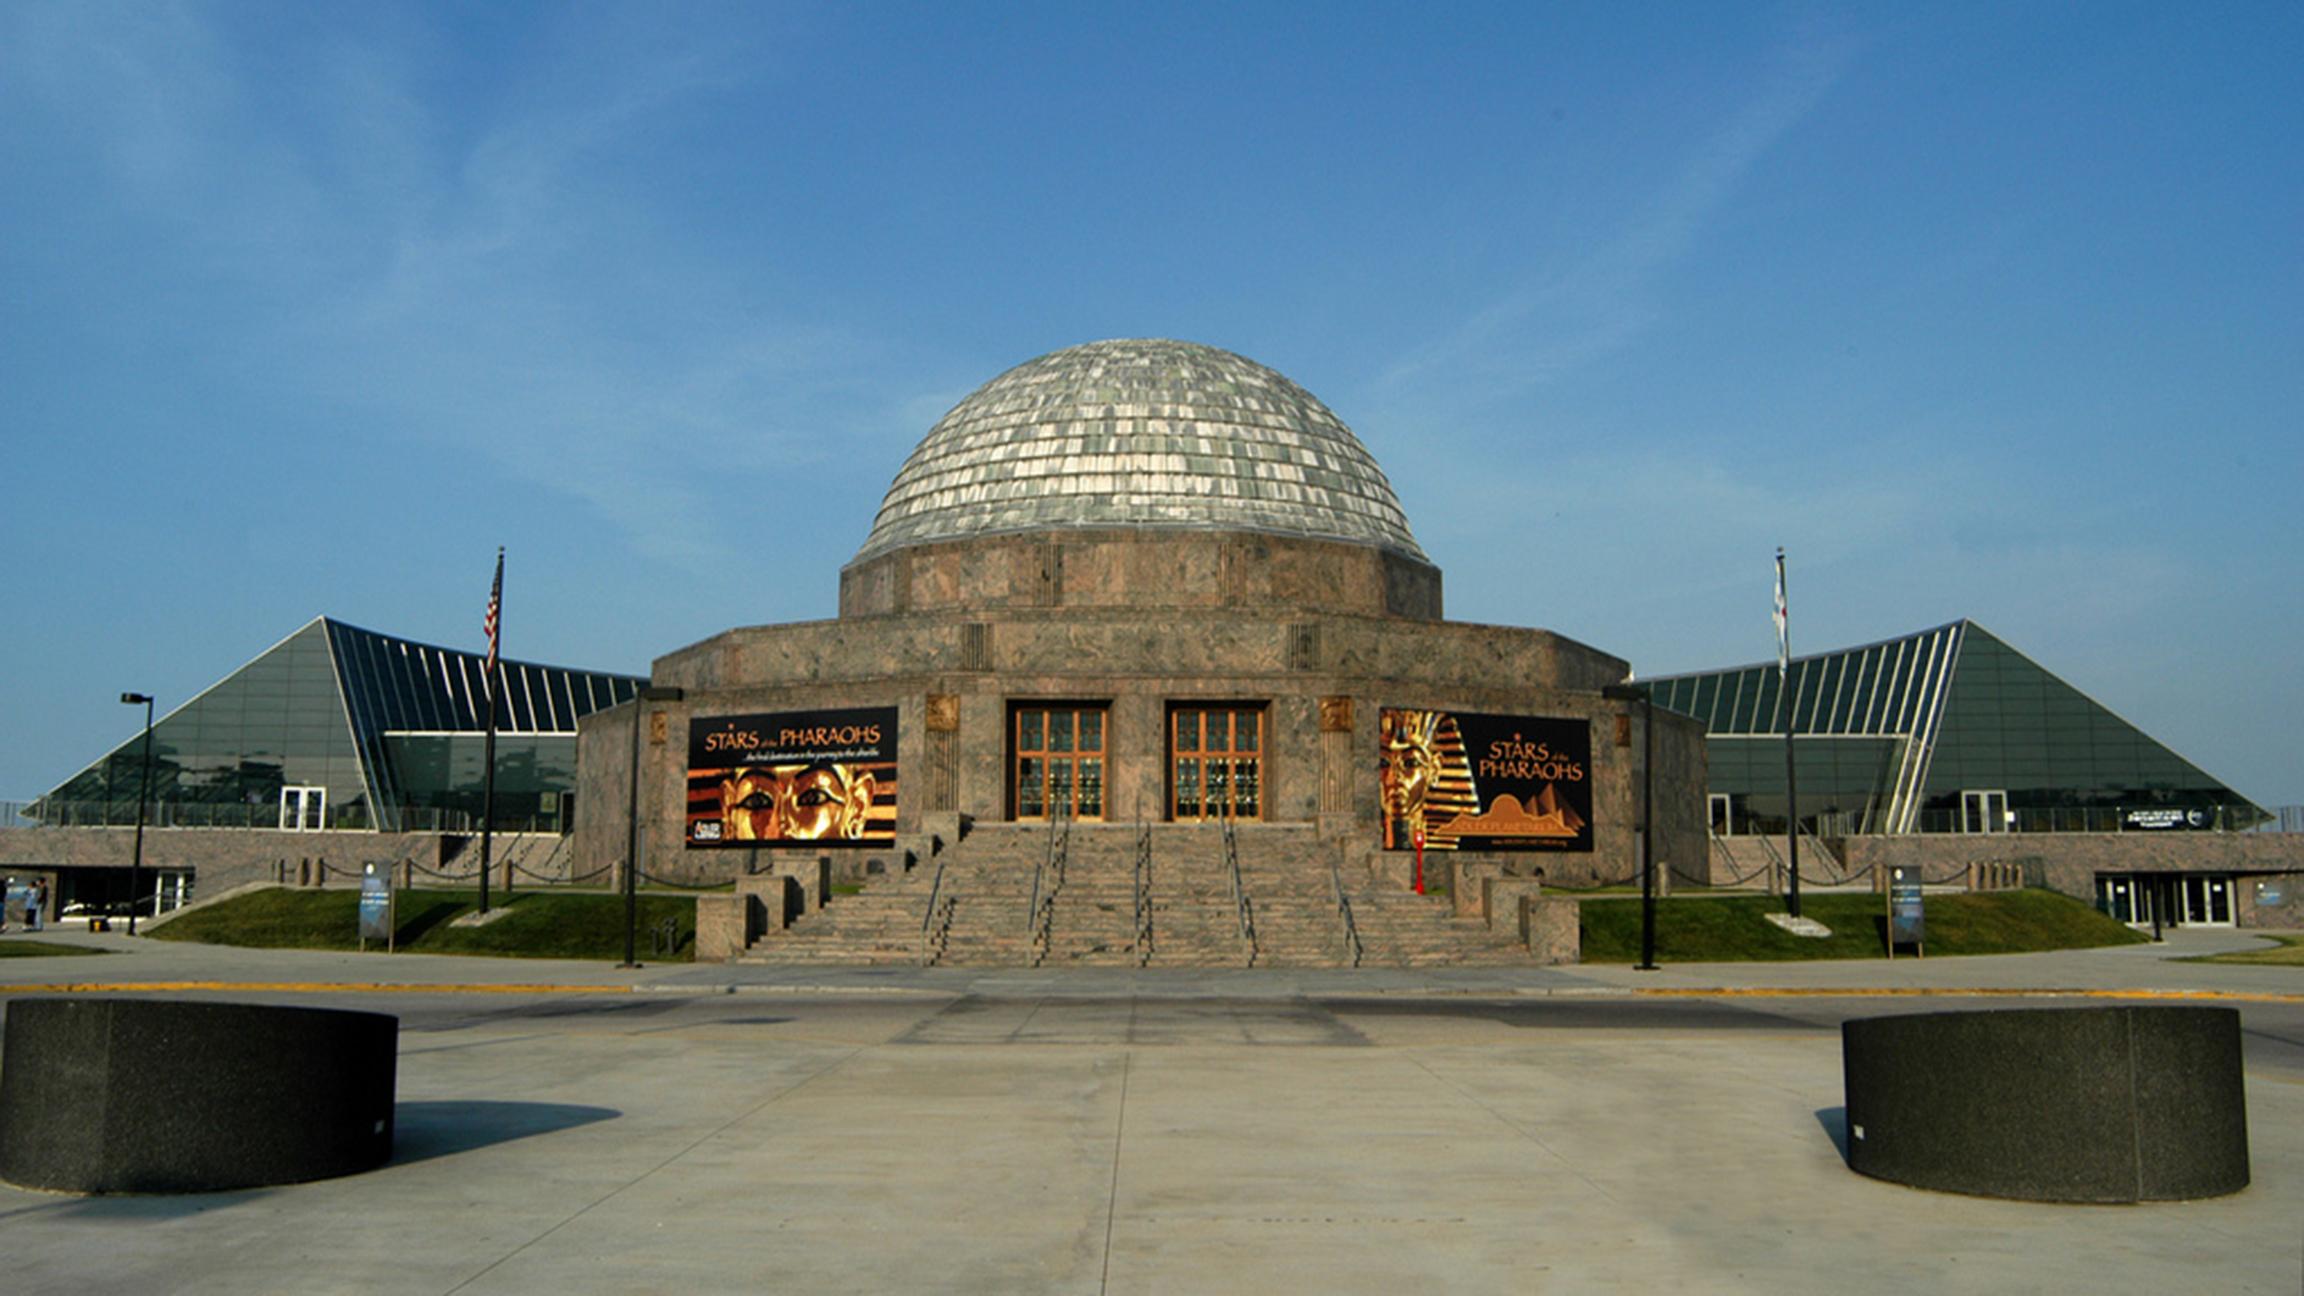 Kick off your weekend with some stargazing at the Adler Planetarium. (Smart Destinations / Flickr)